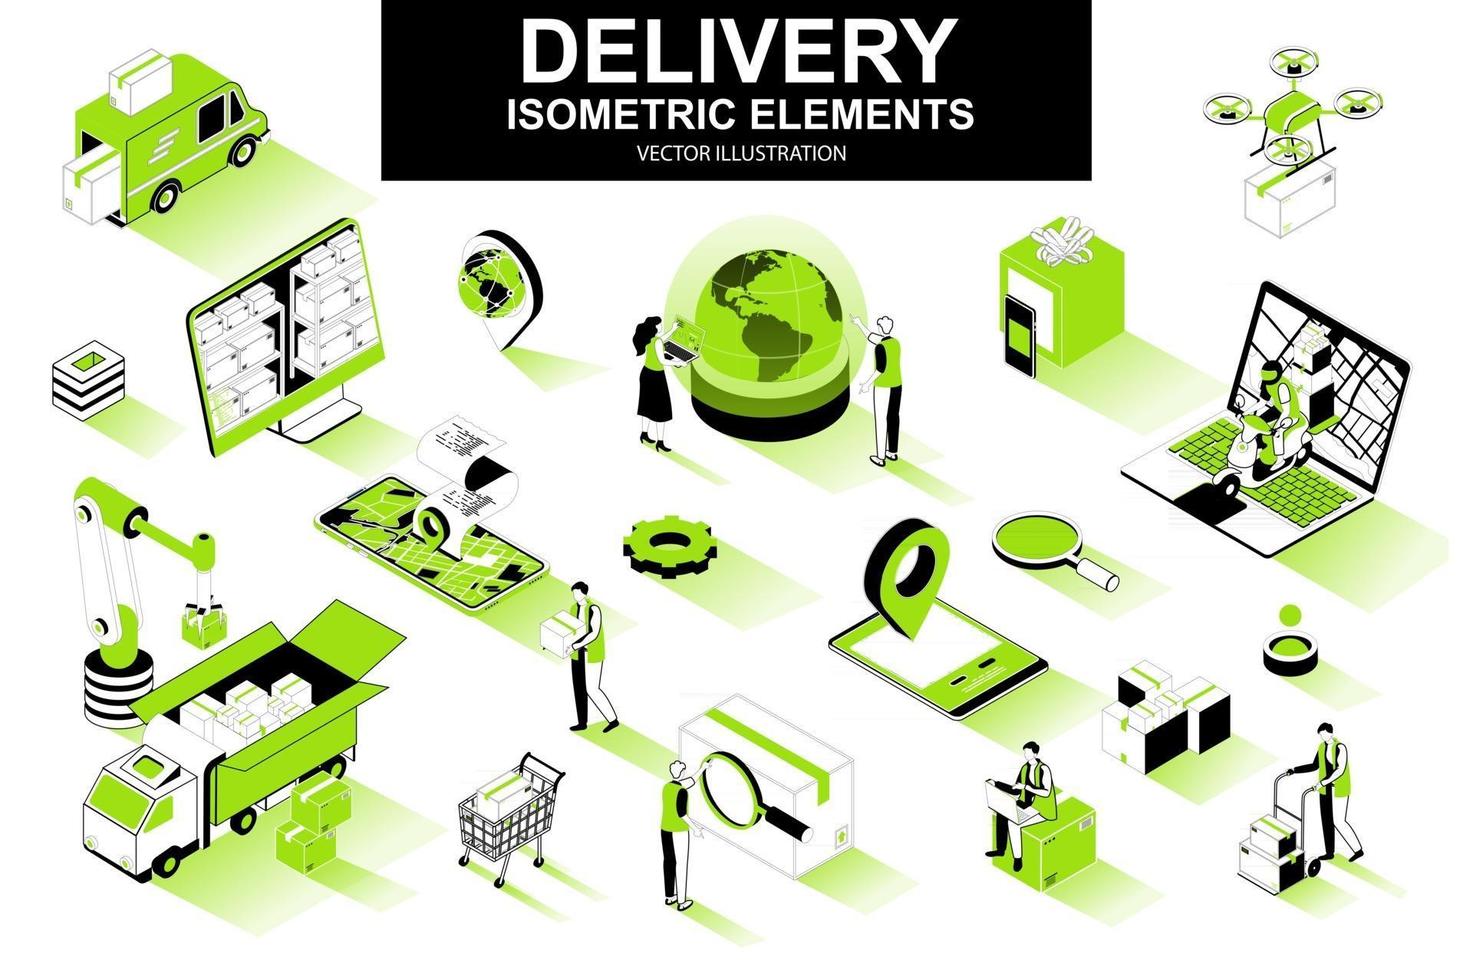 Delivery service bundle of isometric elements vector